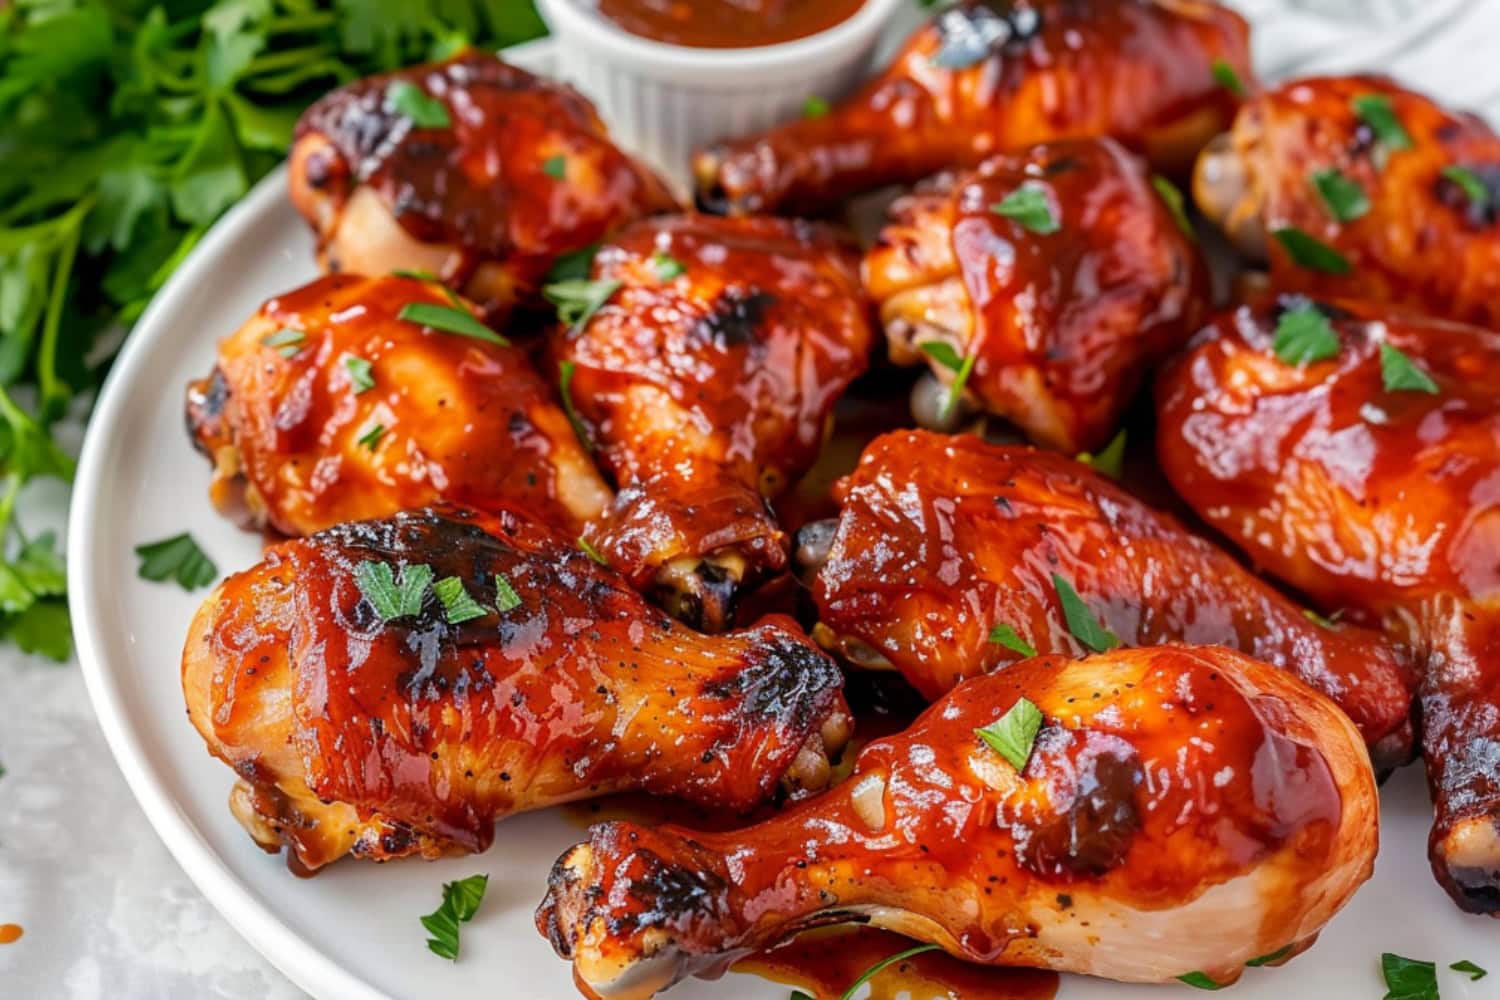 Chicken drumsticks glaze with bbq marinade and garnished chopped celery leaves.